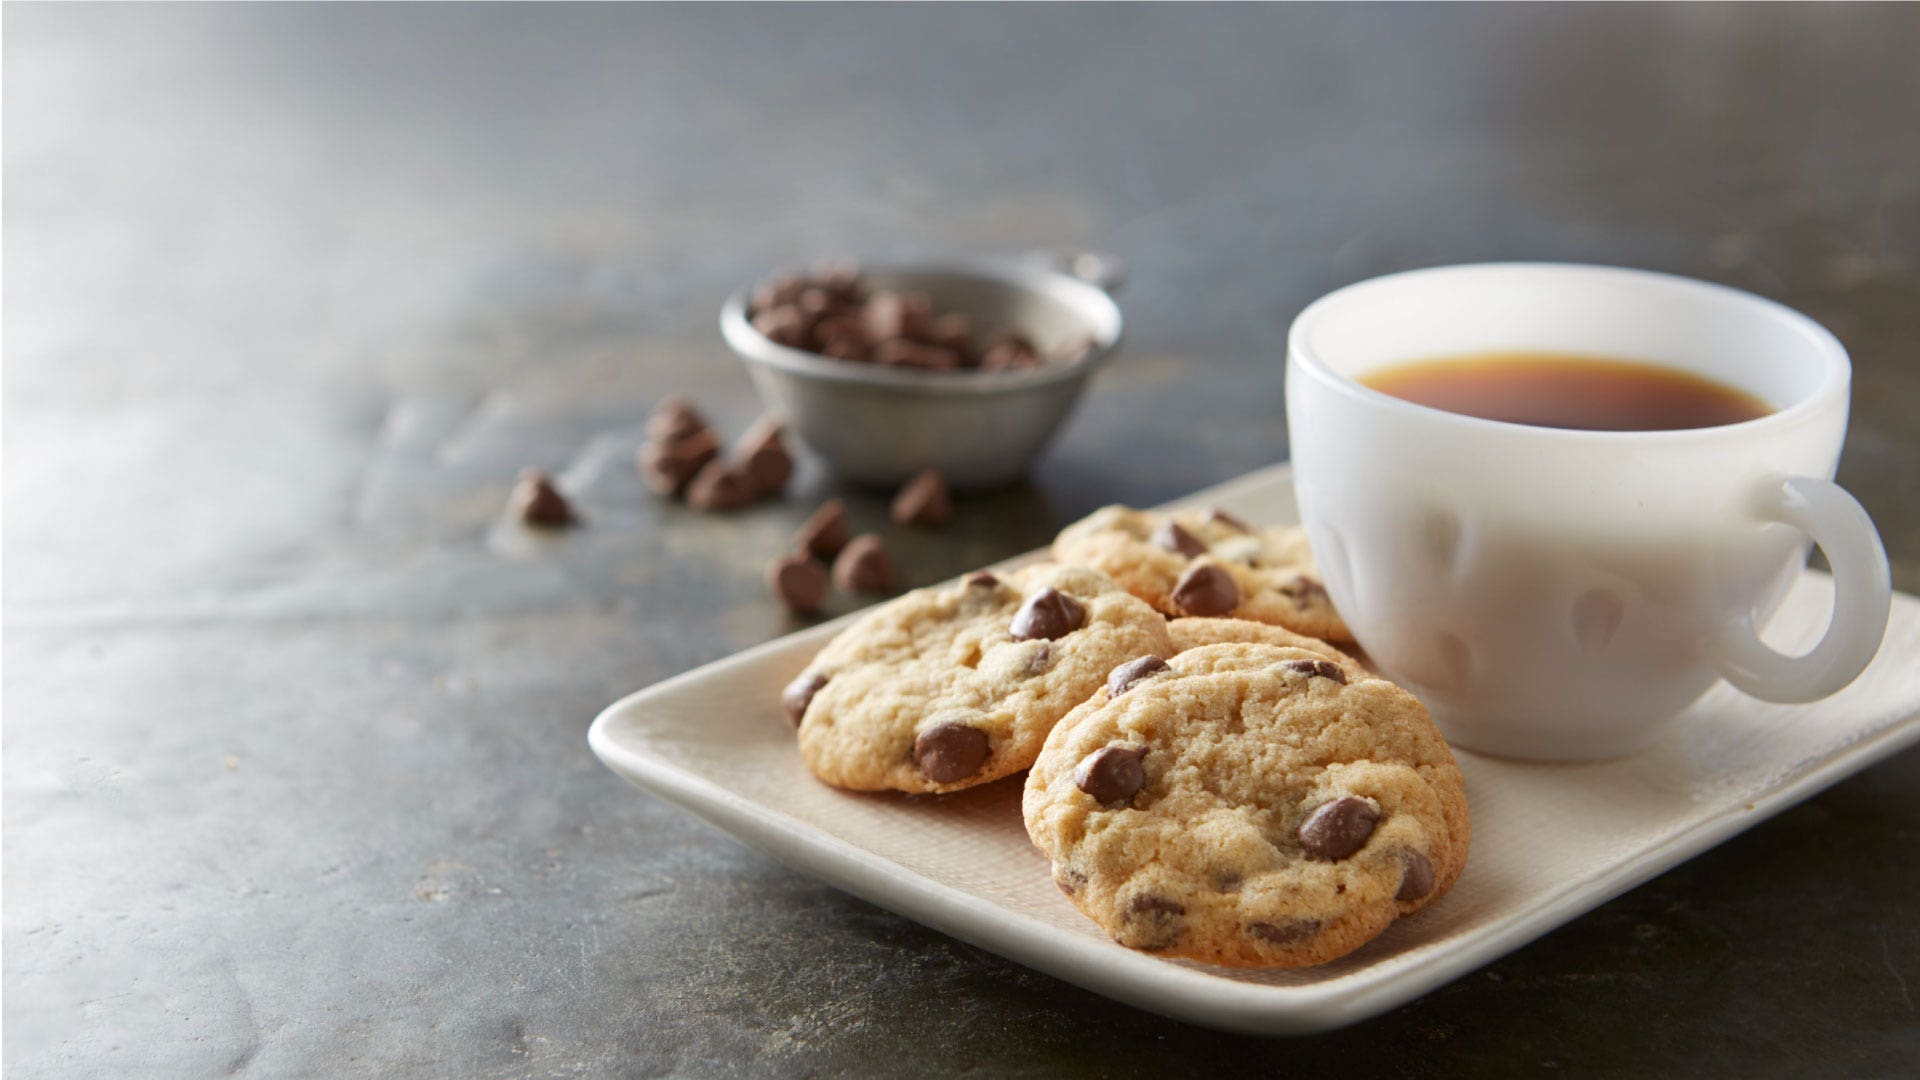 Chocolate Chip Cookies next to a cup of tea